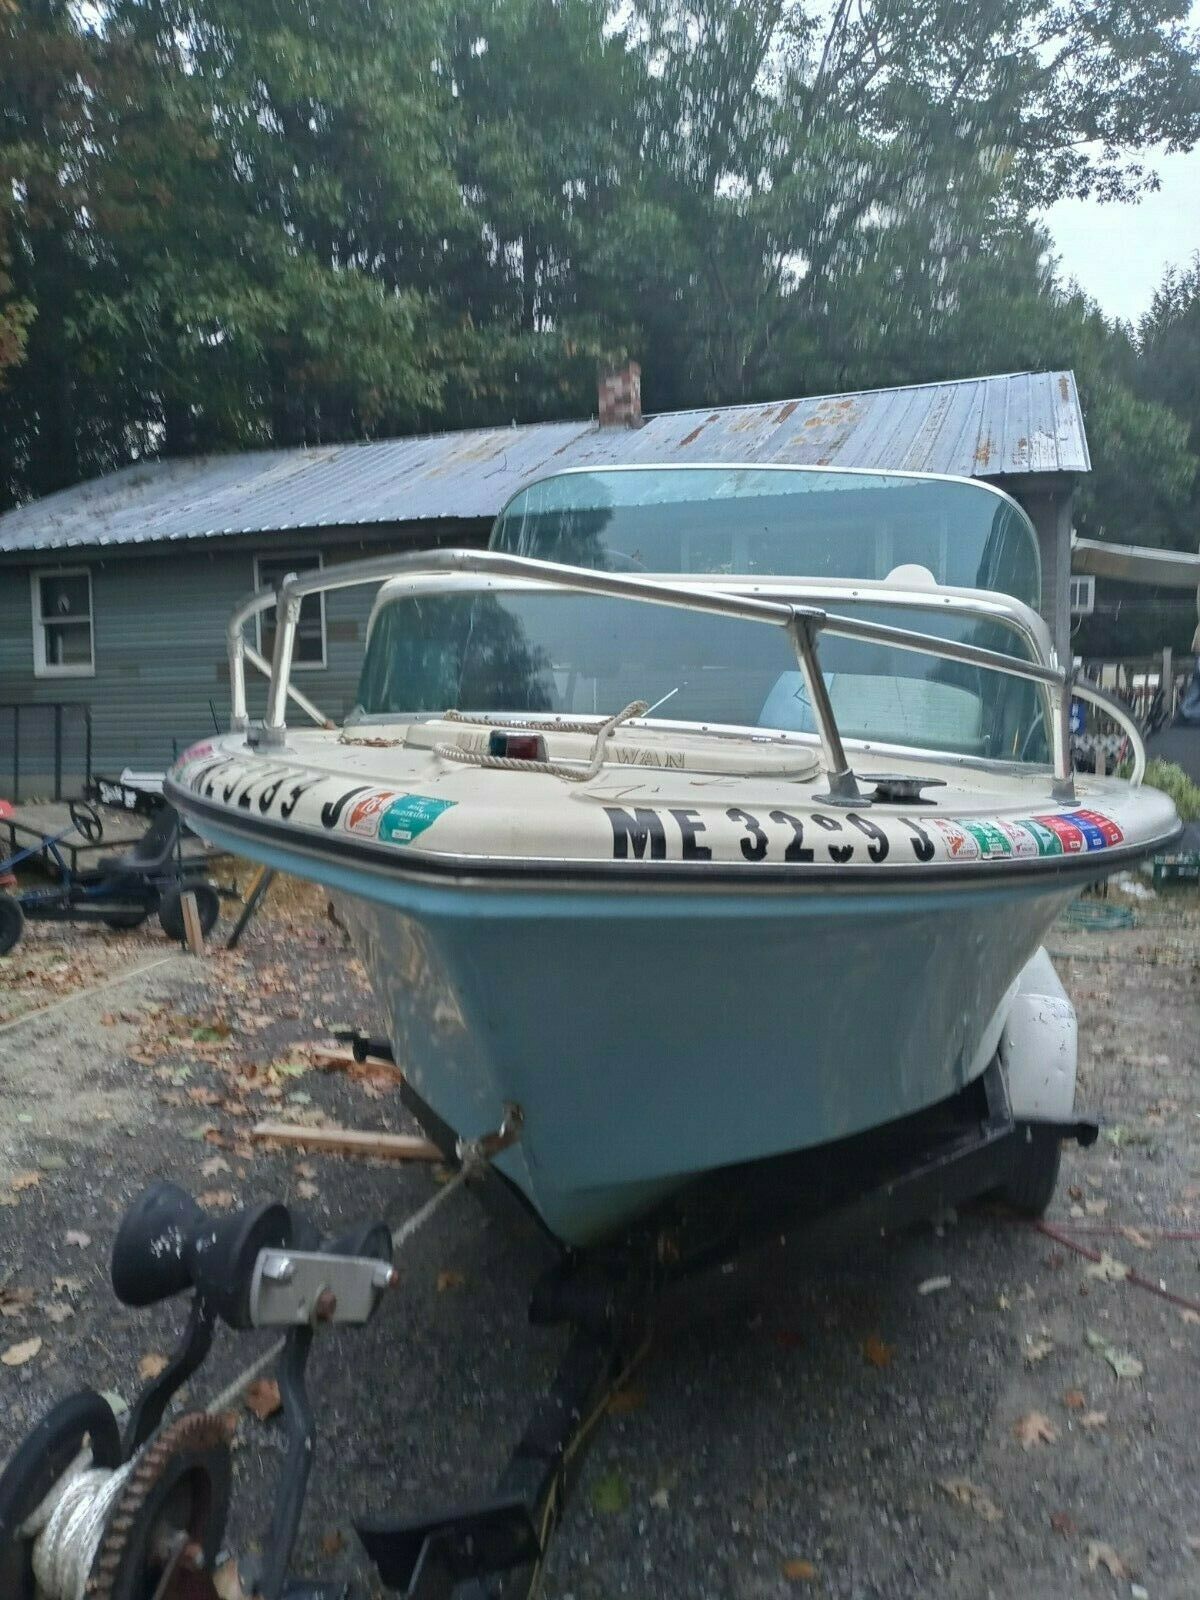 Cobia 1973 for sale for $5,000 - Boats-from-USA.com